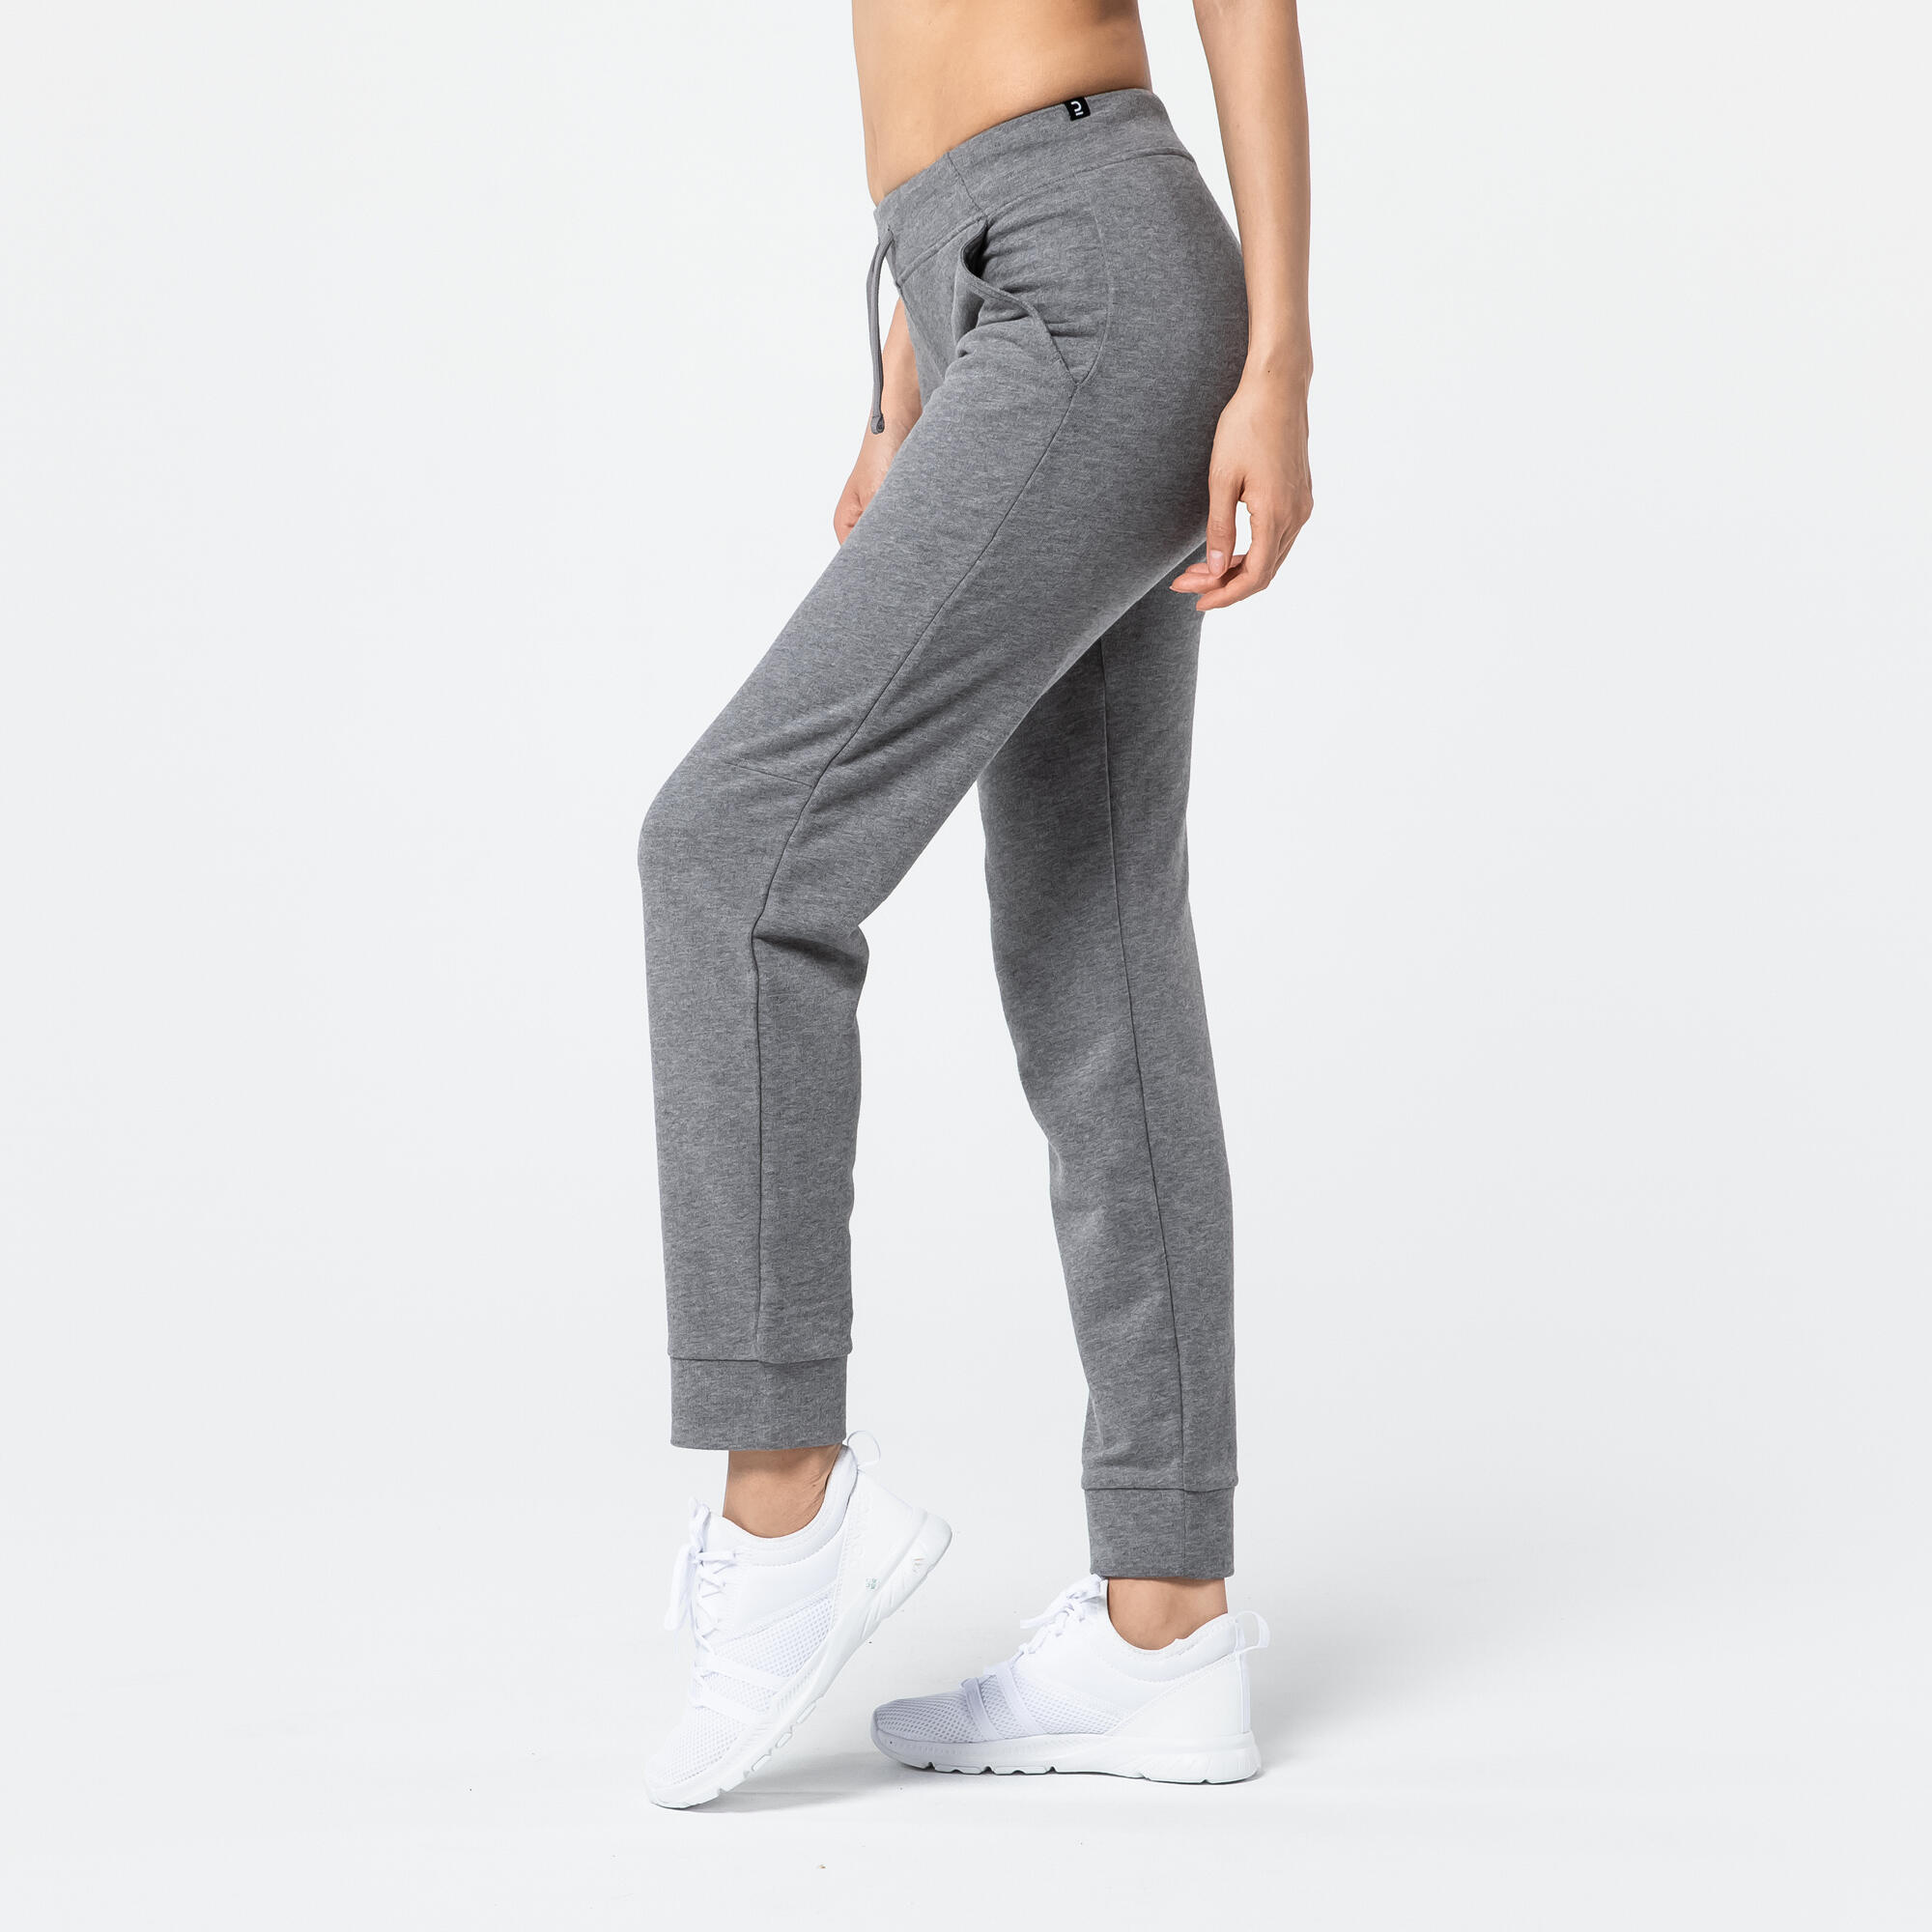 DOMYOS Women's Straight Cut Cotton Jogging Fitness Bottoms With Pocket 500 - Grey